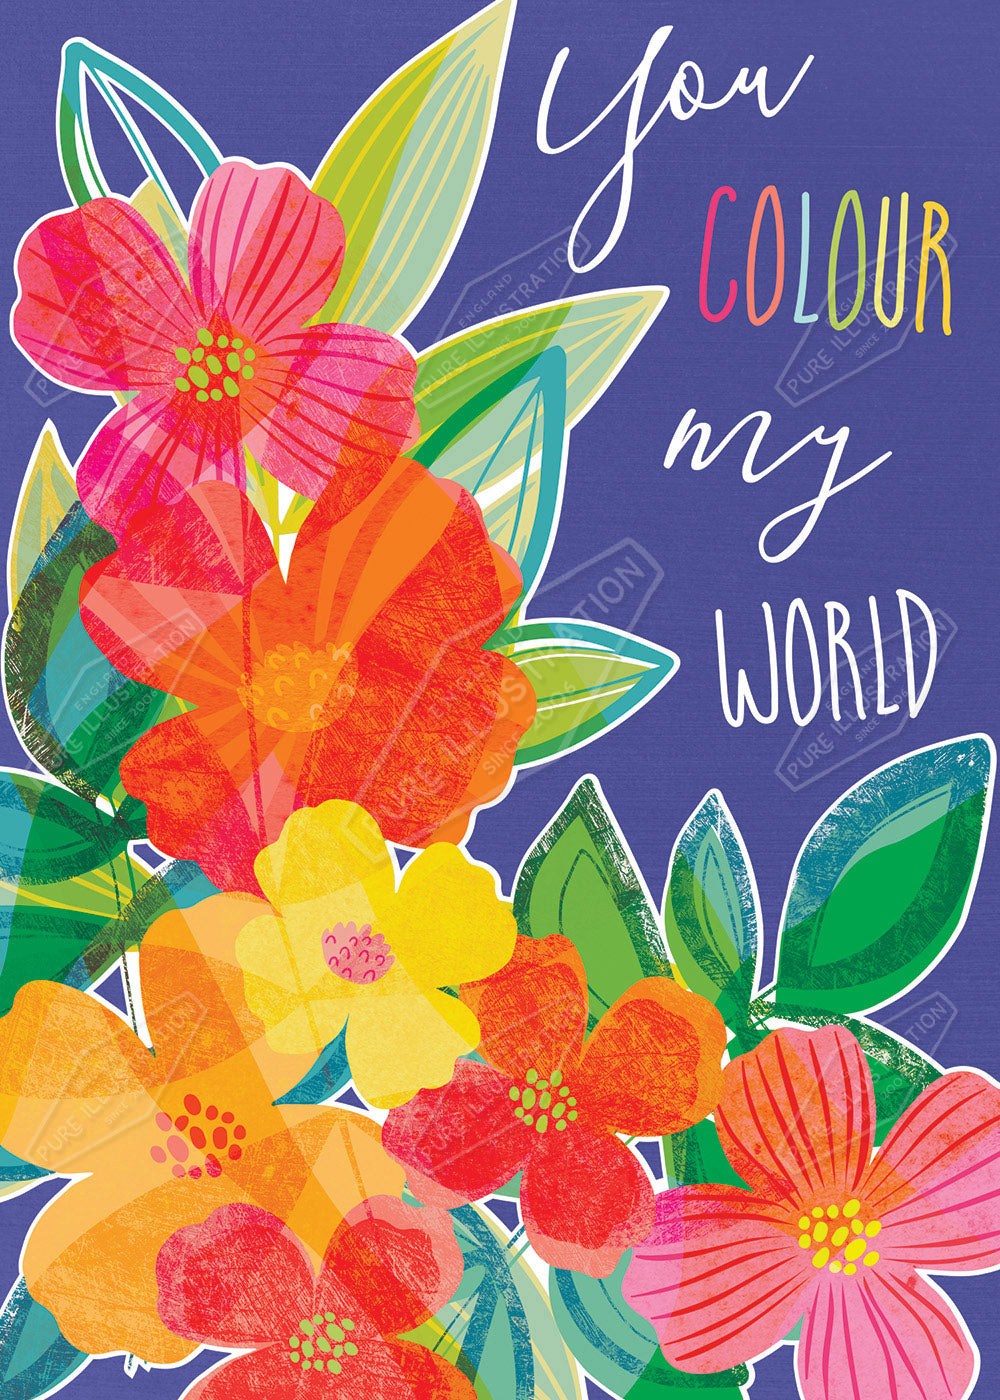 Happy Birthday Bright Flowers Design by Gill Eggleston for Pure Art Licensing Agency & Surface Design Studio